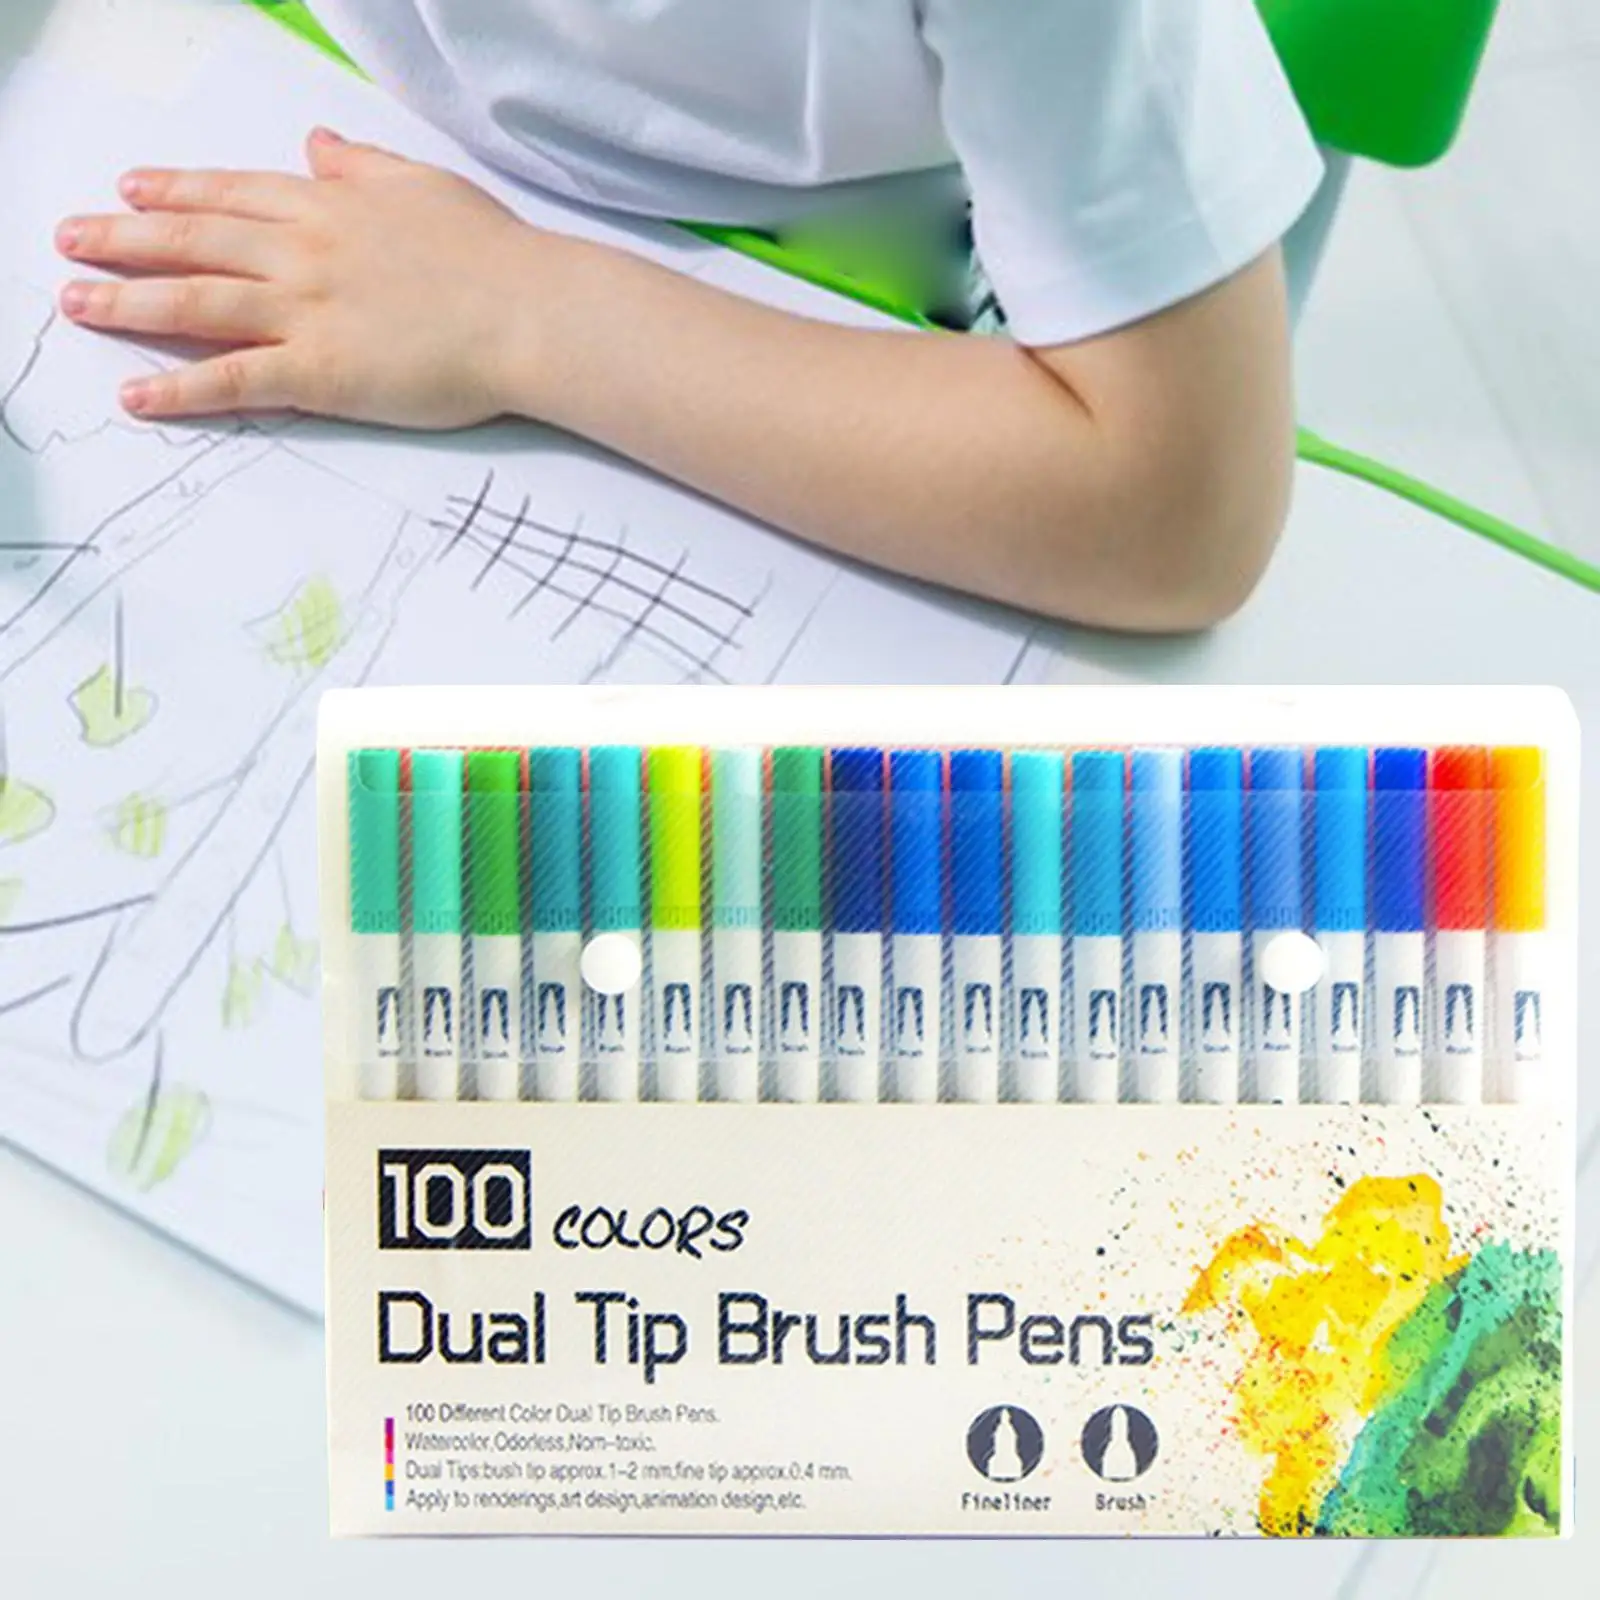 100x Dual Tip Brush Pens Coloring Writing for Child Calligraphy Art Supplies